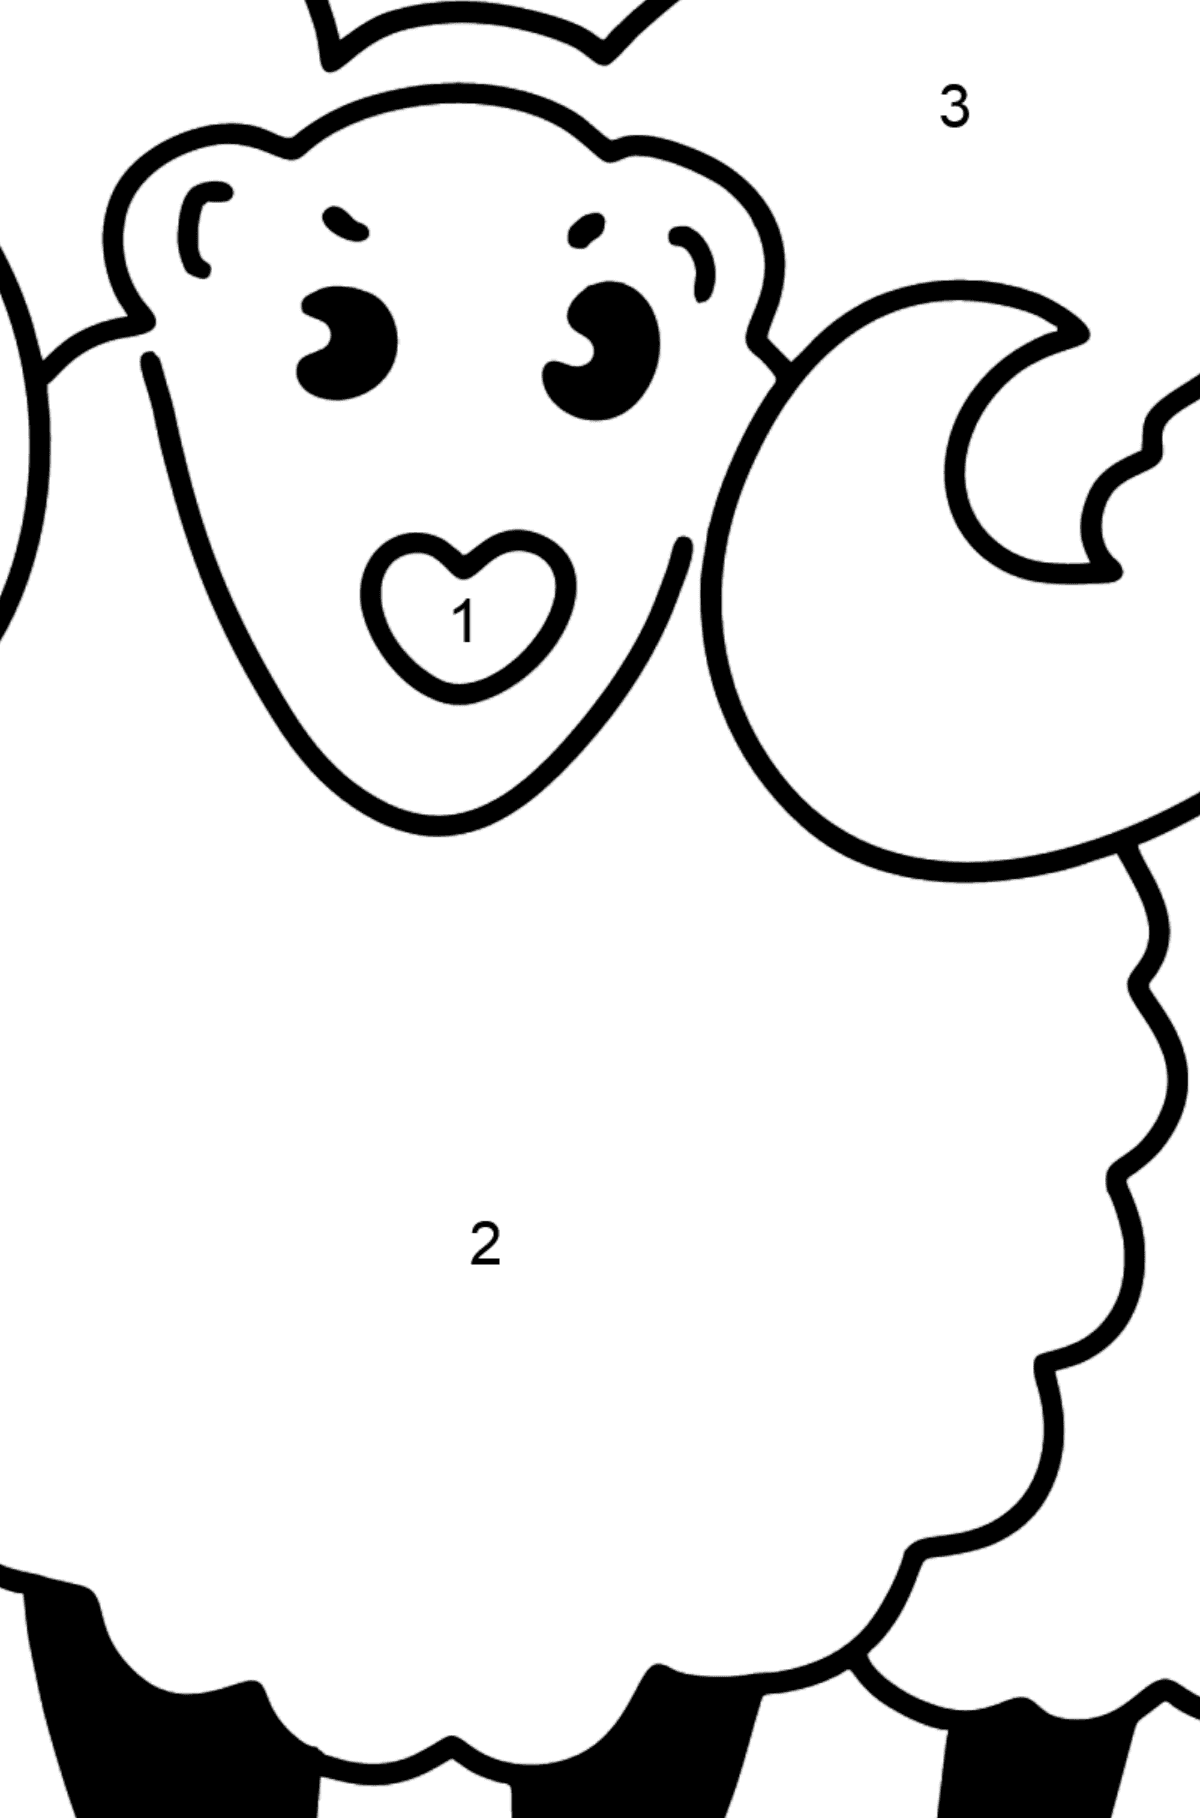 Home Lamb coloring page - Coloring by Numbers for Kids